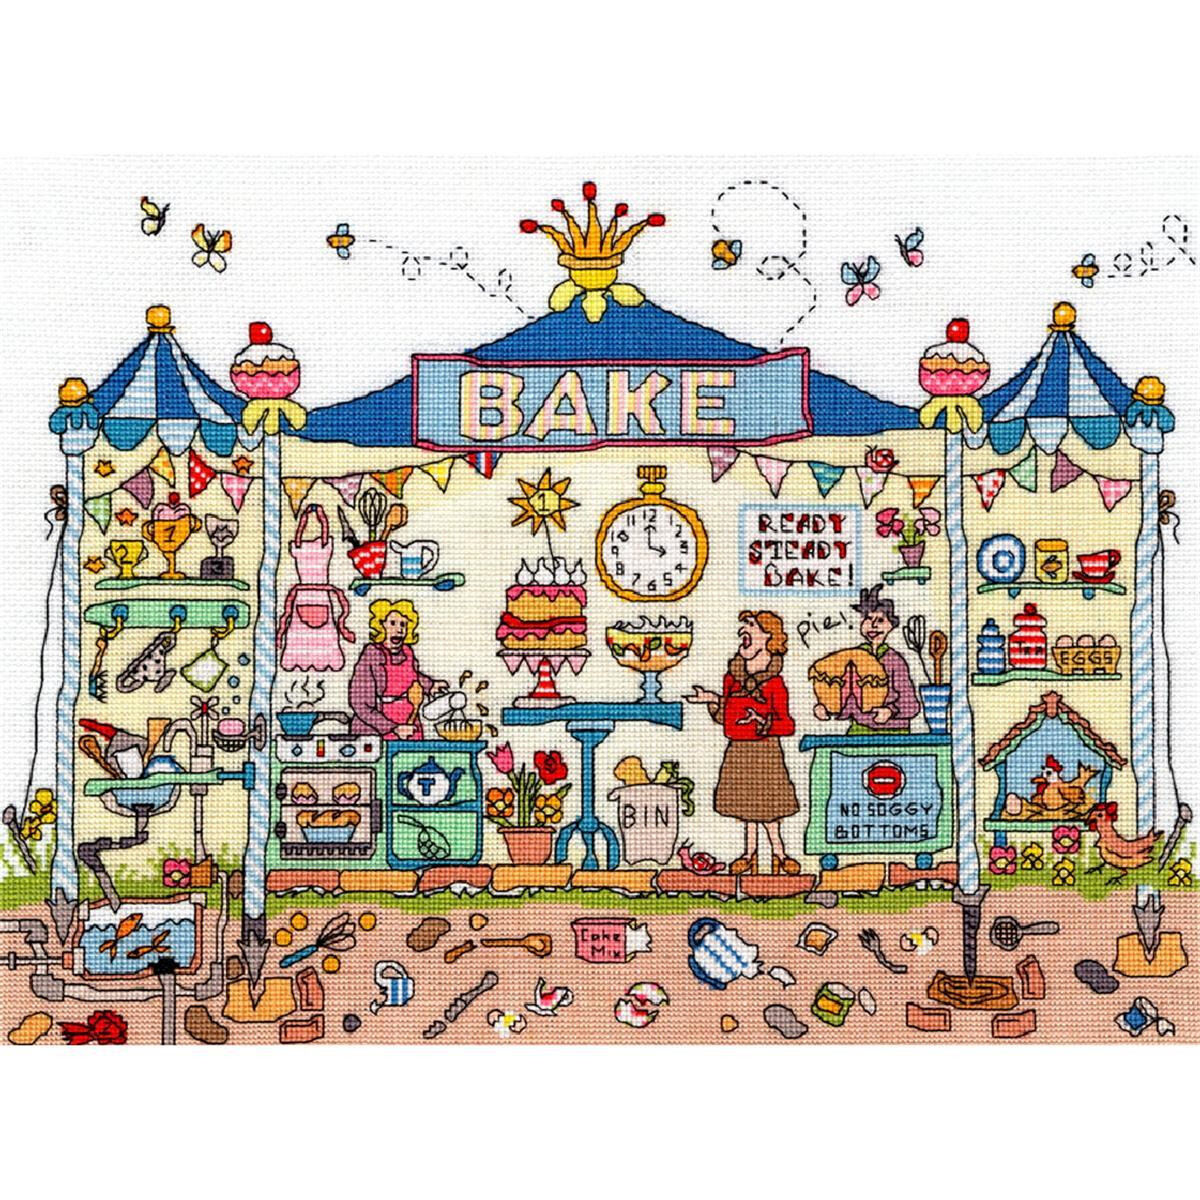 Illustration of a colorful bake sale stand at a fair with...